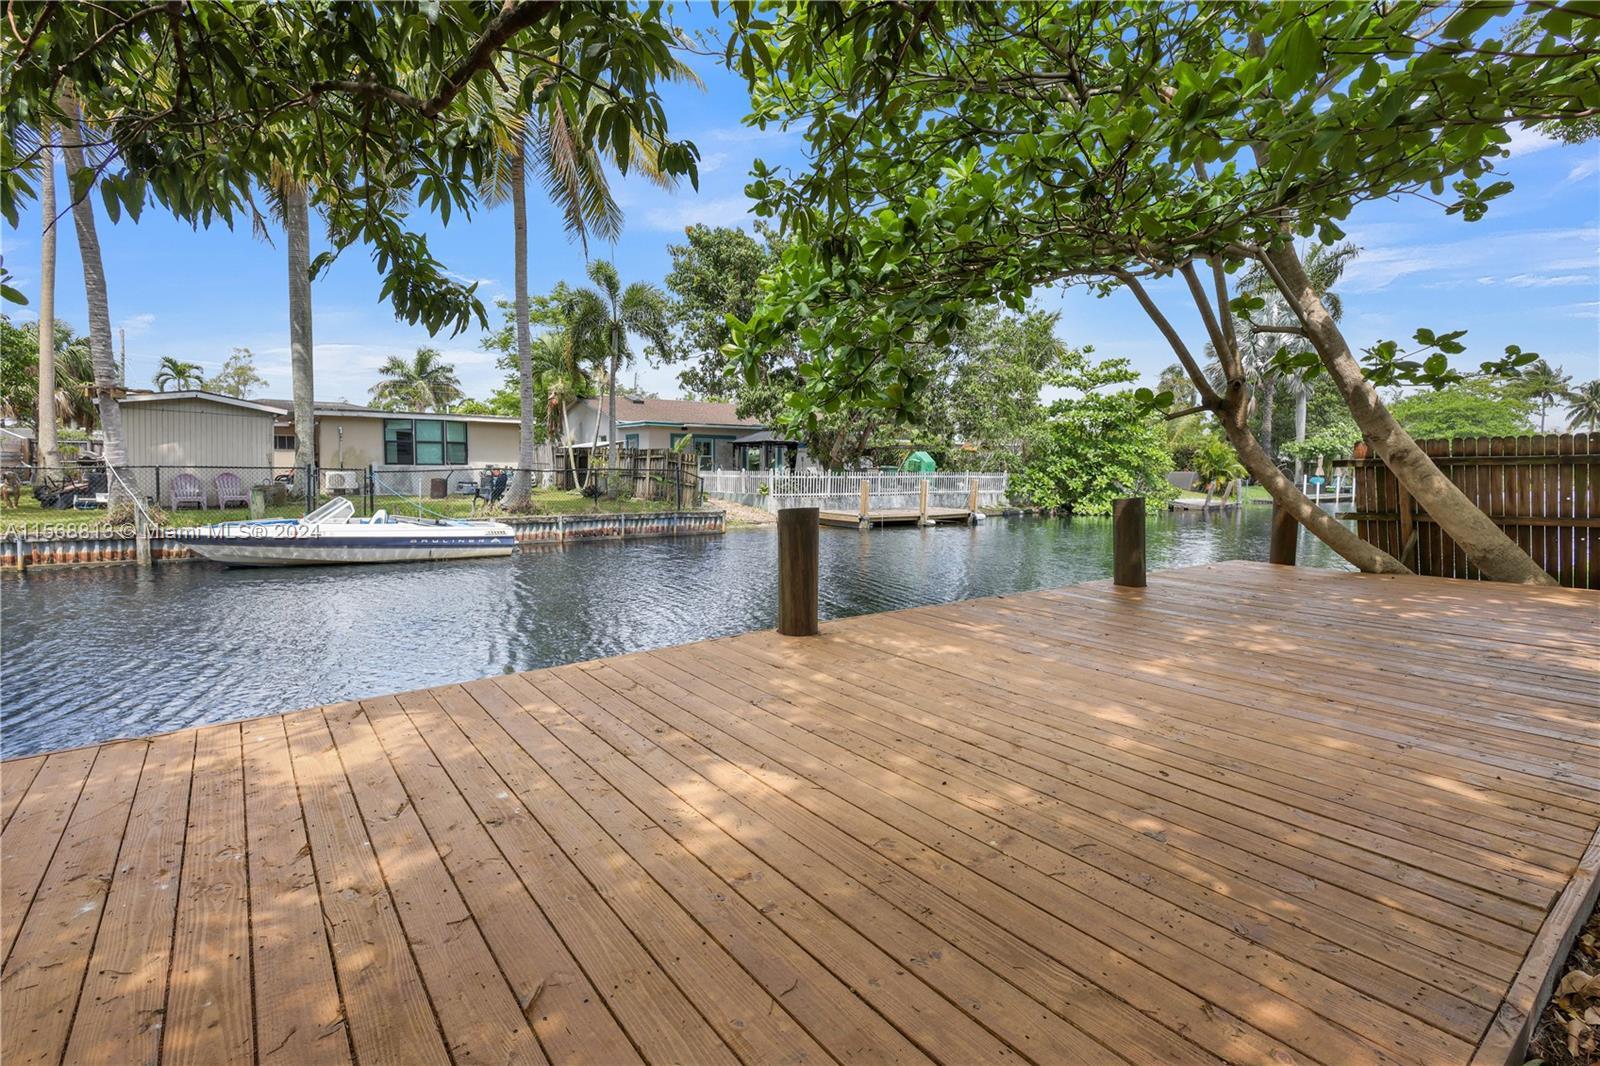 This magnificent Boater's paradise Single Family home with Direct Ocean Access offers a blend of lux